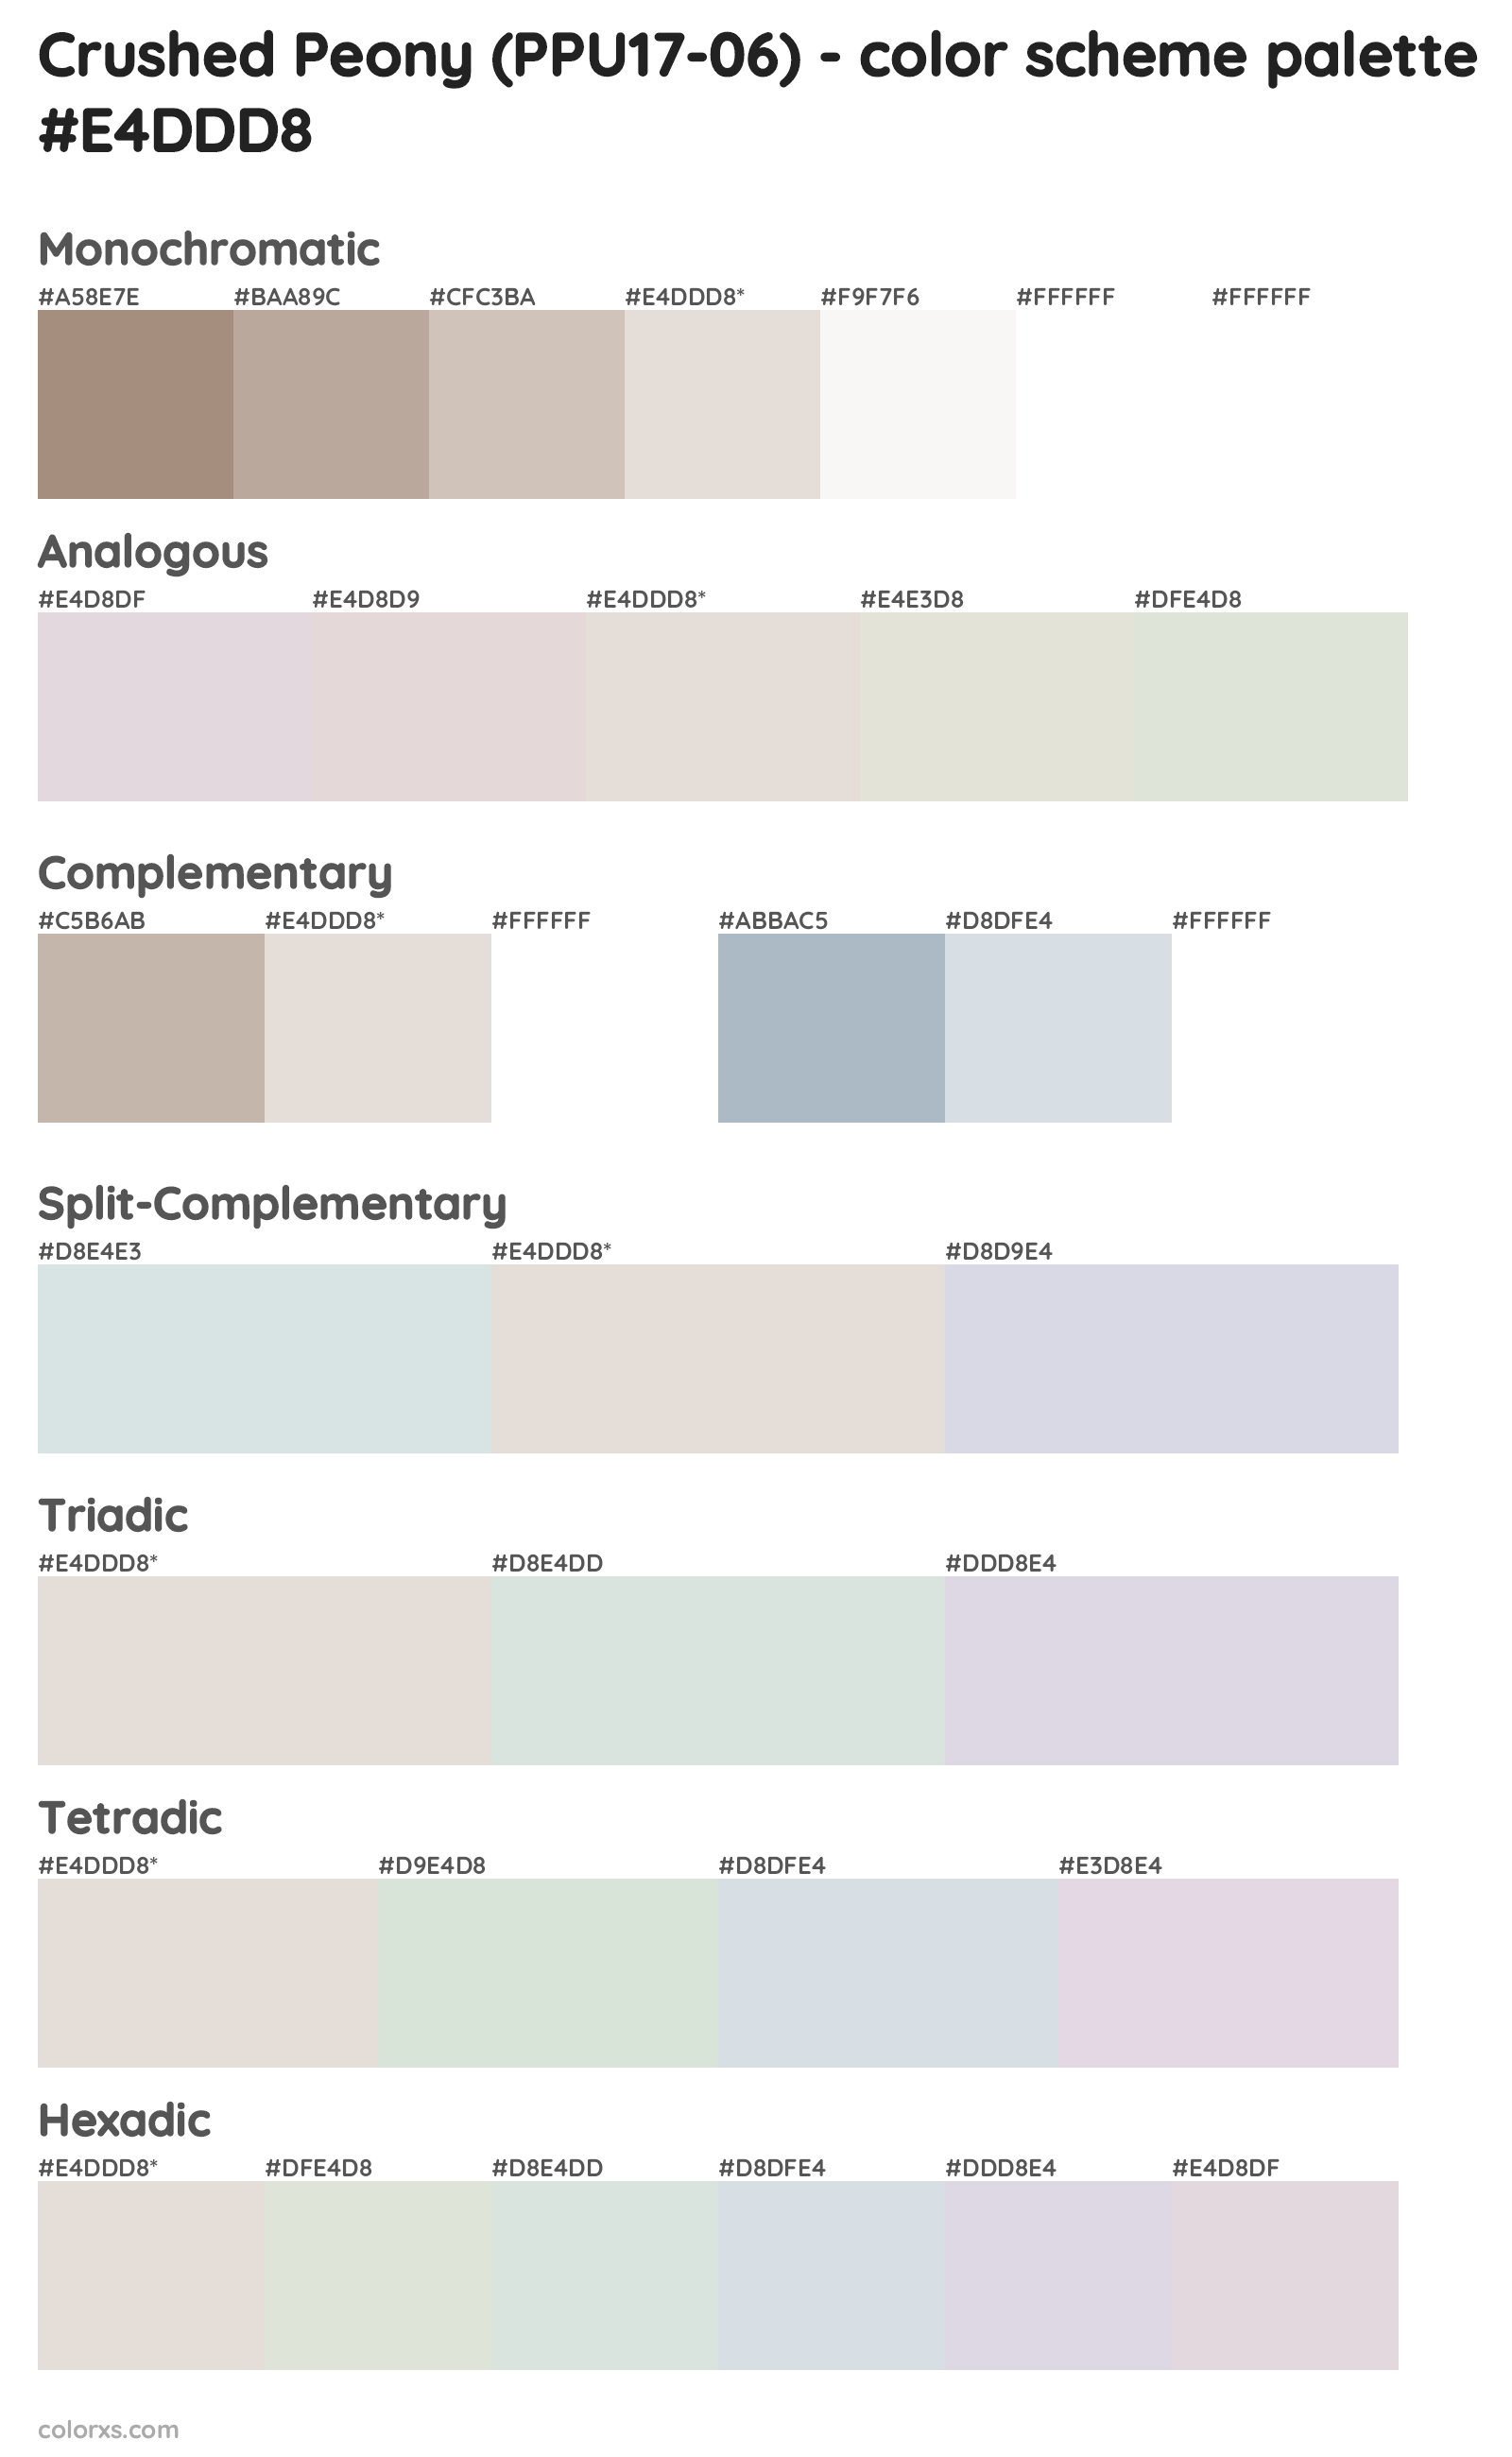 Crushed Peony (PPU17-06) Color Scheme Palettes